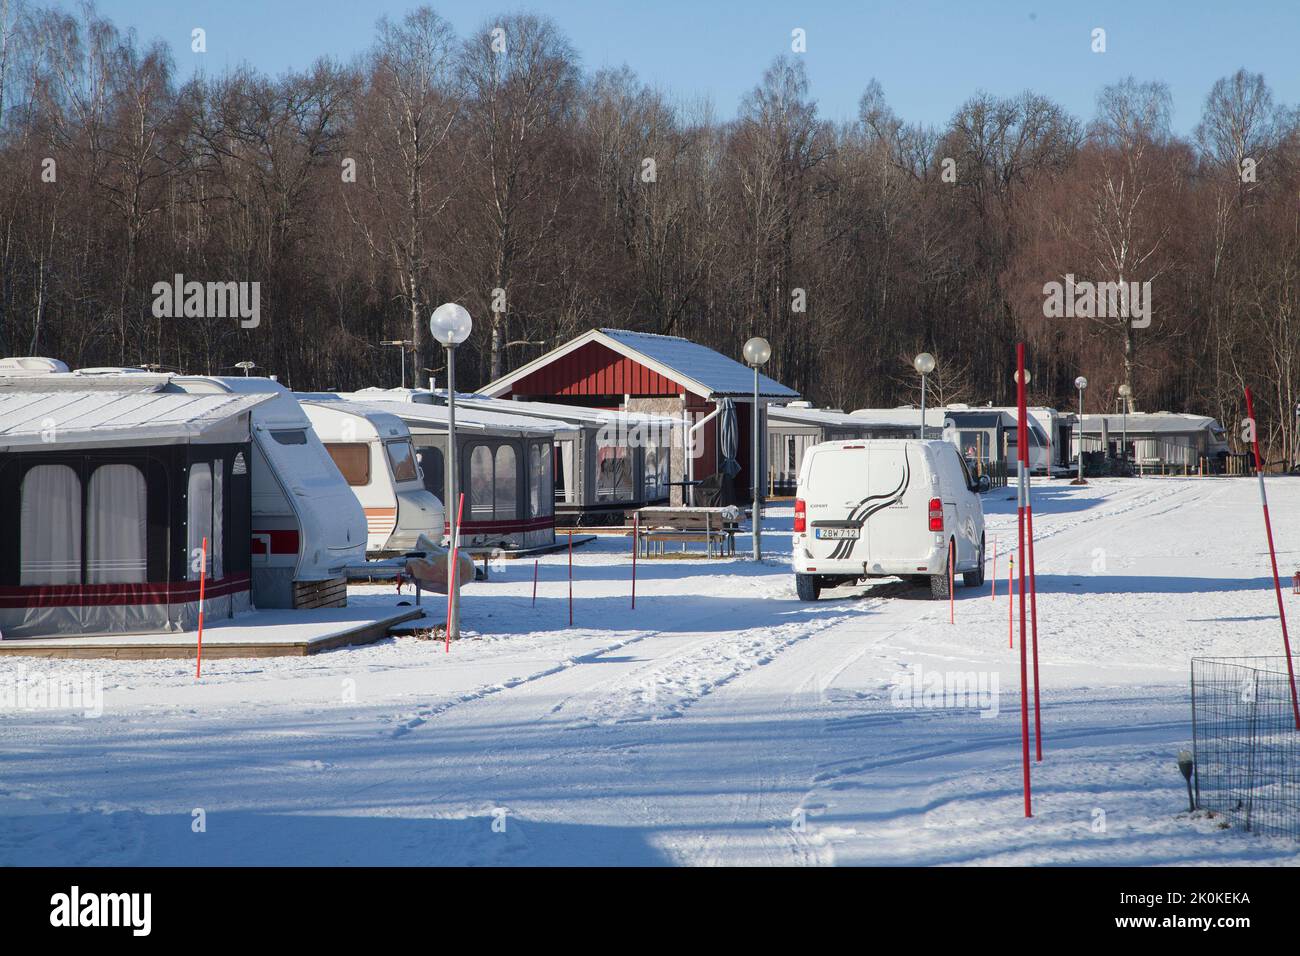 YEAR-ROUND CAMPING in caravan on a snowy winter´s day Stock Photo